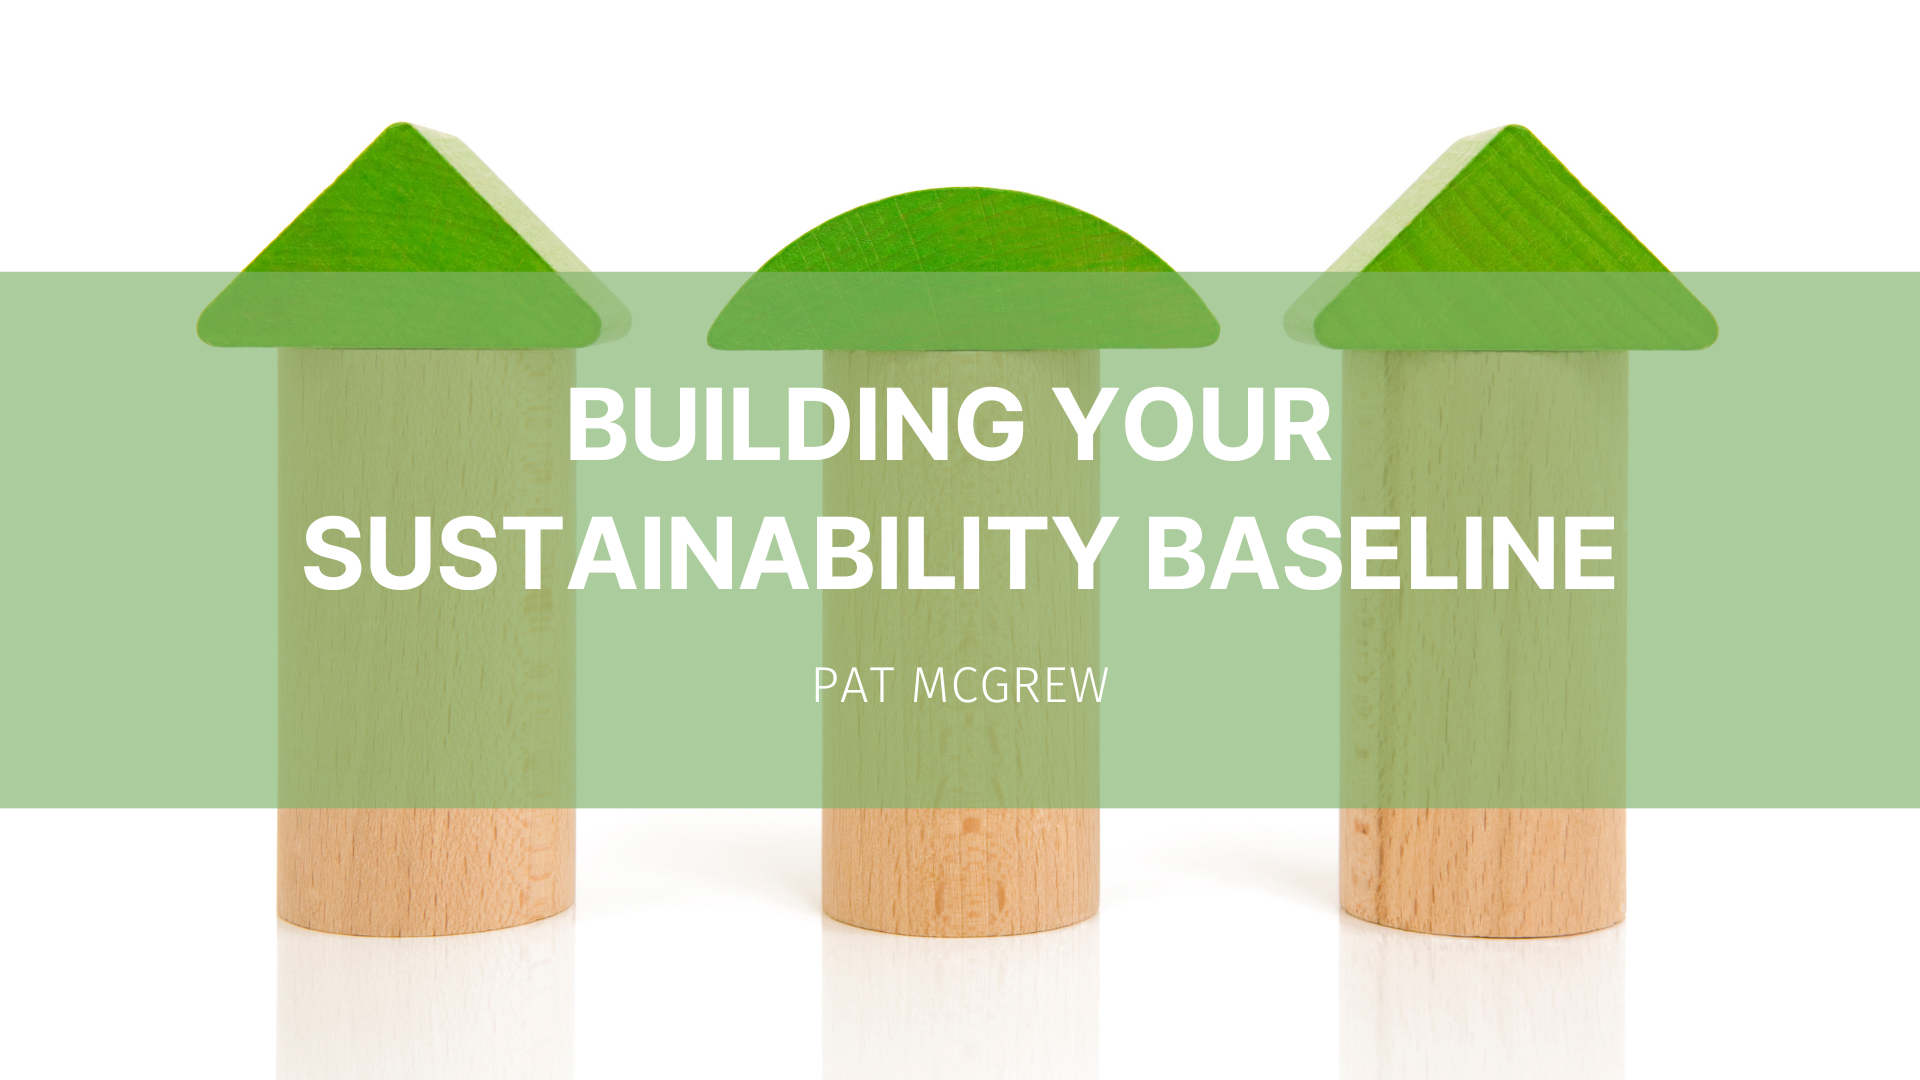 Featured image for “Building your sustainability baseline”